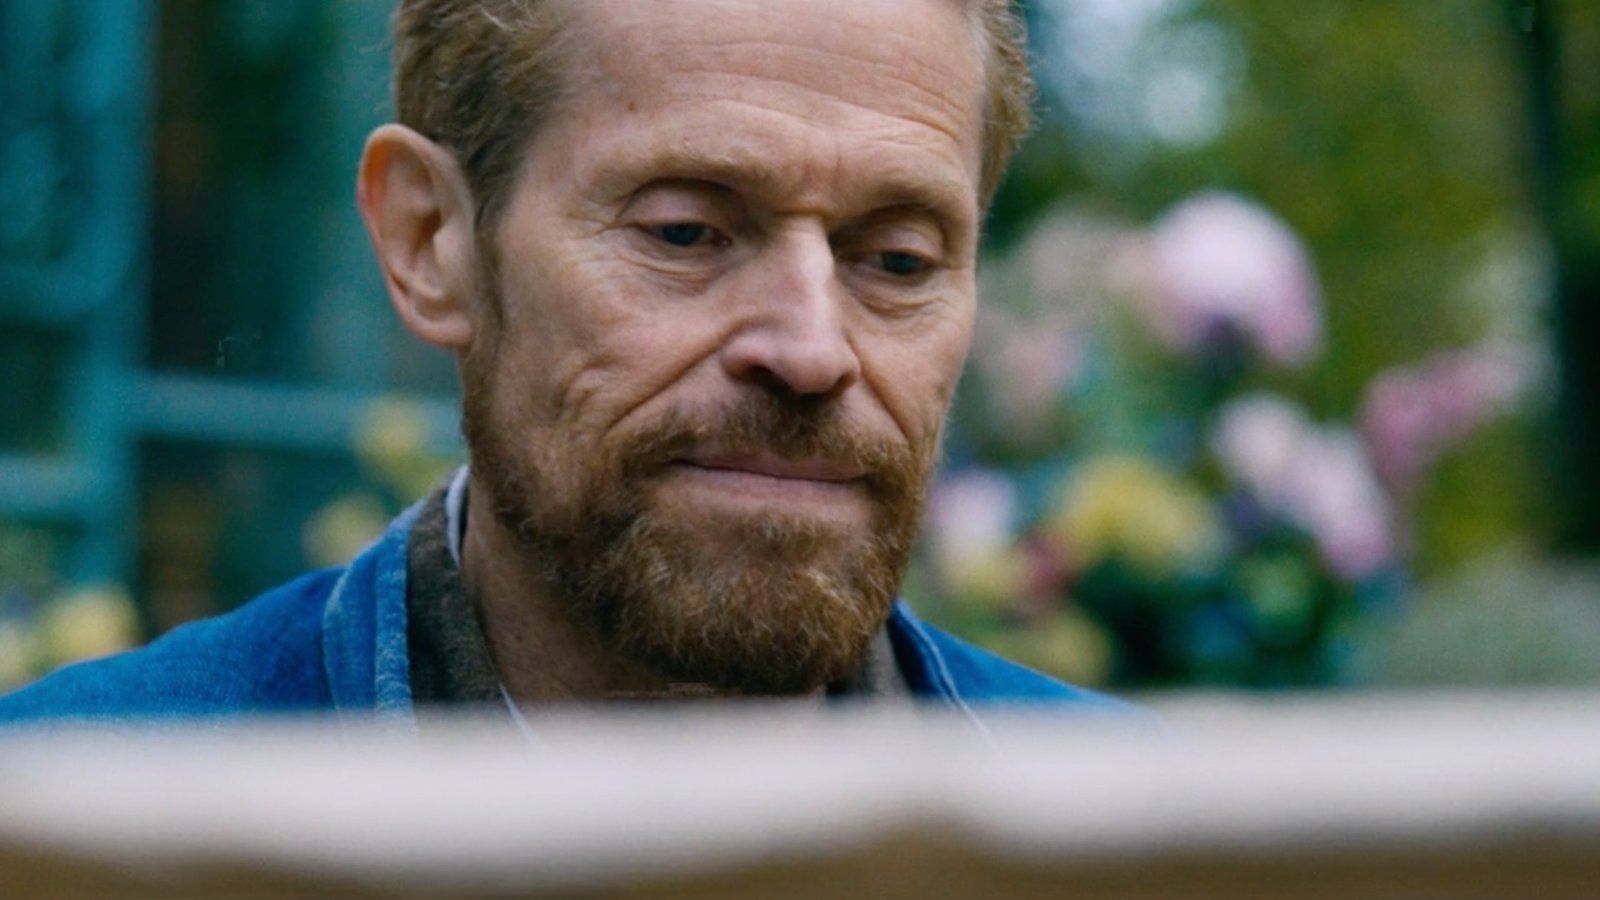 At Eternity's Gate' Review: An Exquisite Portrayal of van Gogh at